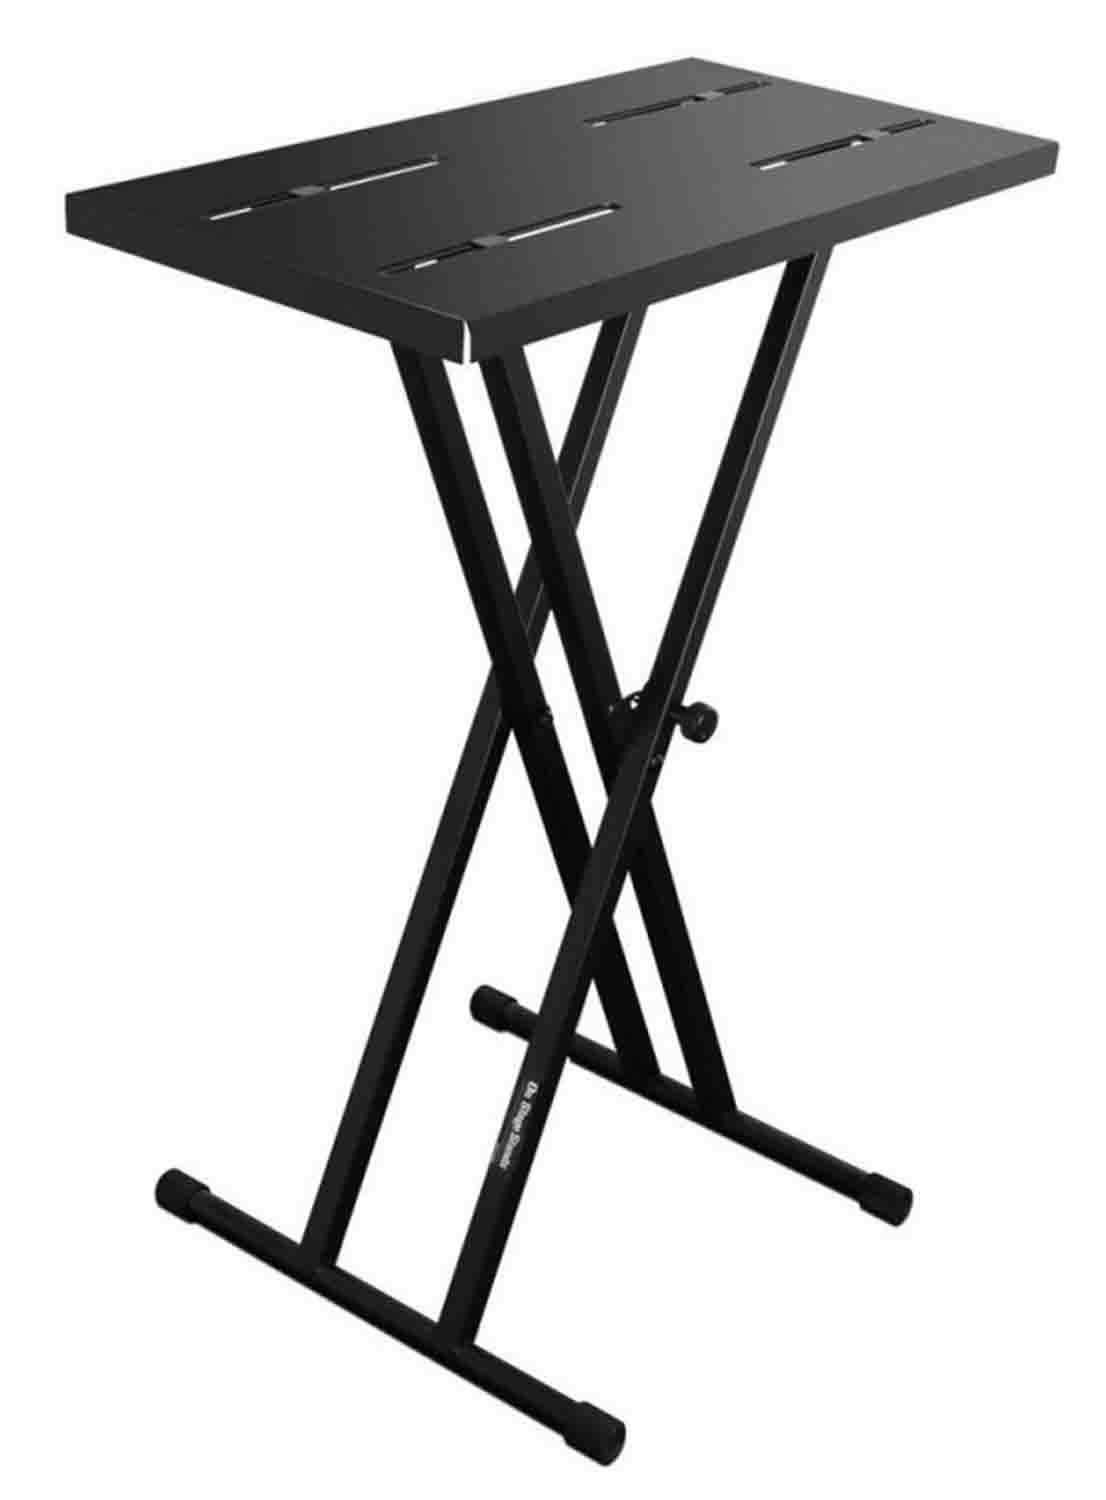 OnStage KSA7100 Utility Tray for X-Style Keyboard Stand - Black - Hollywood DJ